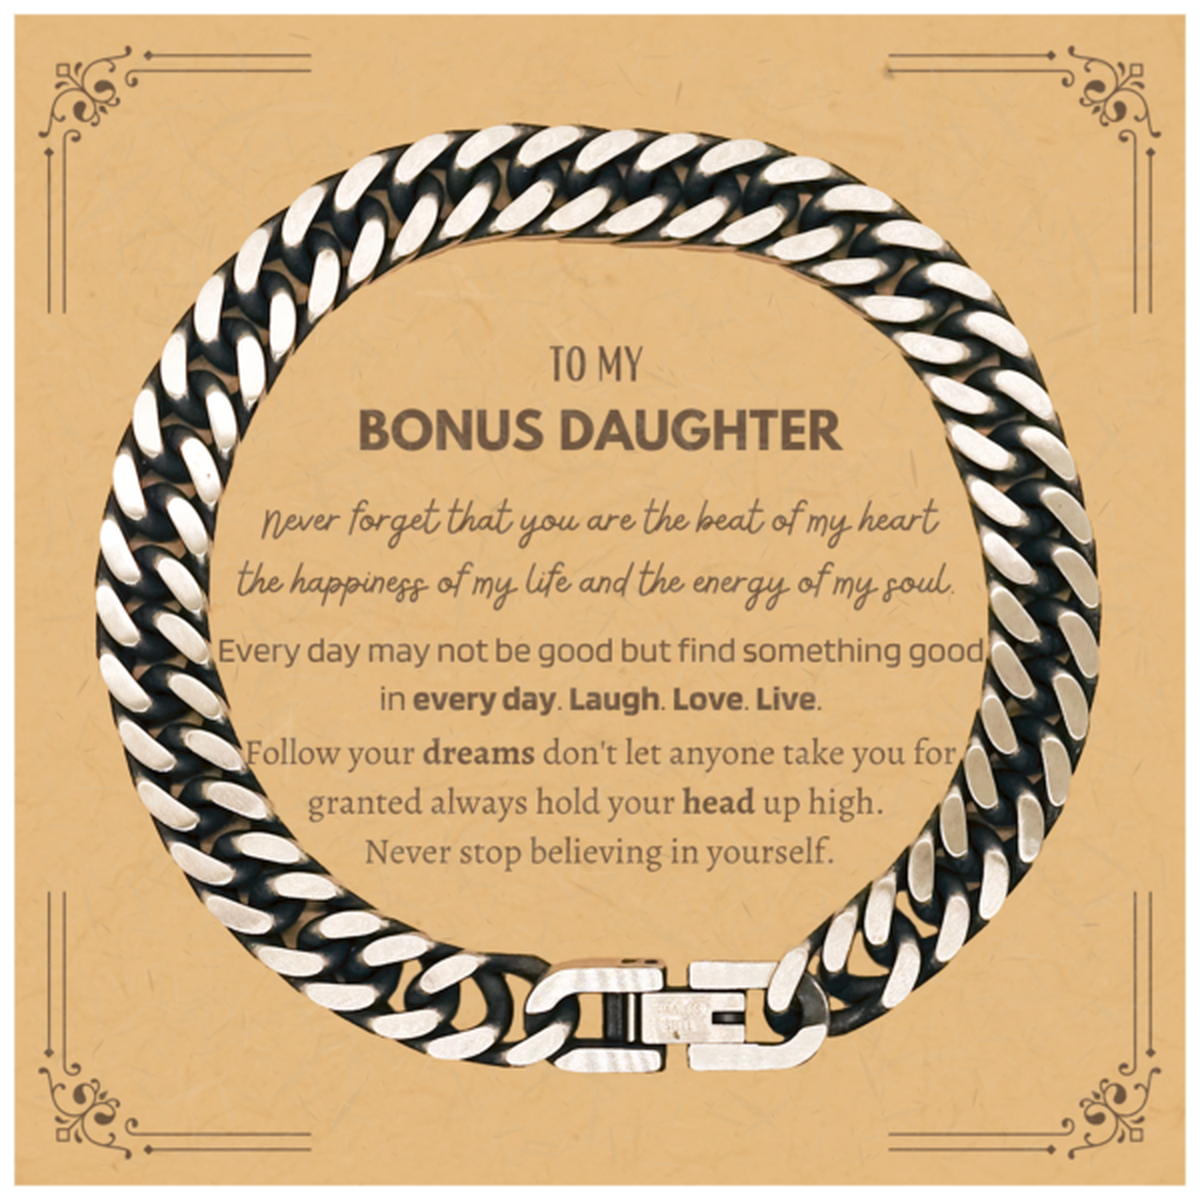 To My Bonus Daughter Message Card Gifts, Christmas Bonus Daughter Cuban Link Chain Bracelet Present, Birthday Unique Motivational For Bonus Daughter, To My Bonus Daughter Never forget that you are the beat of my heart the happiness of my life and the ener